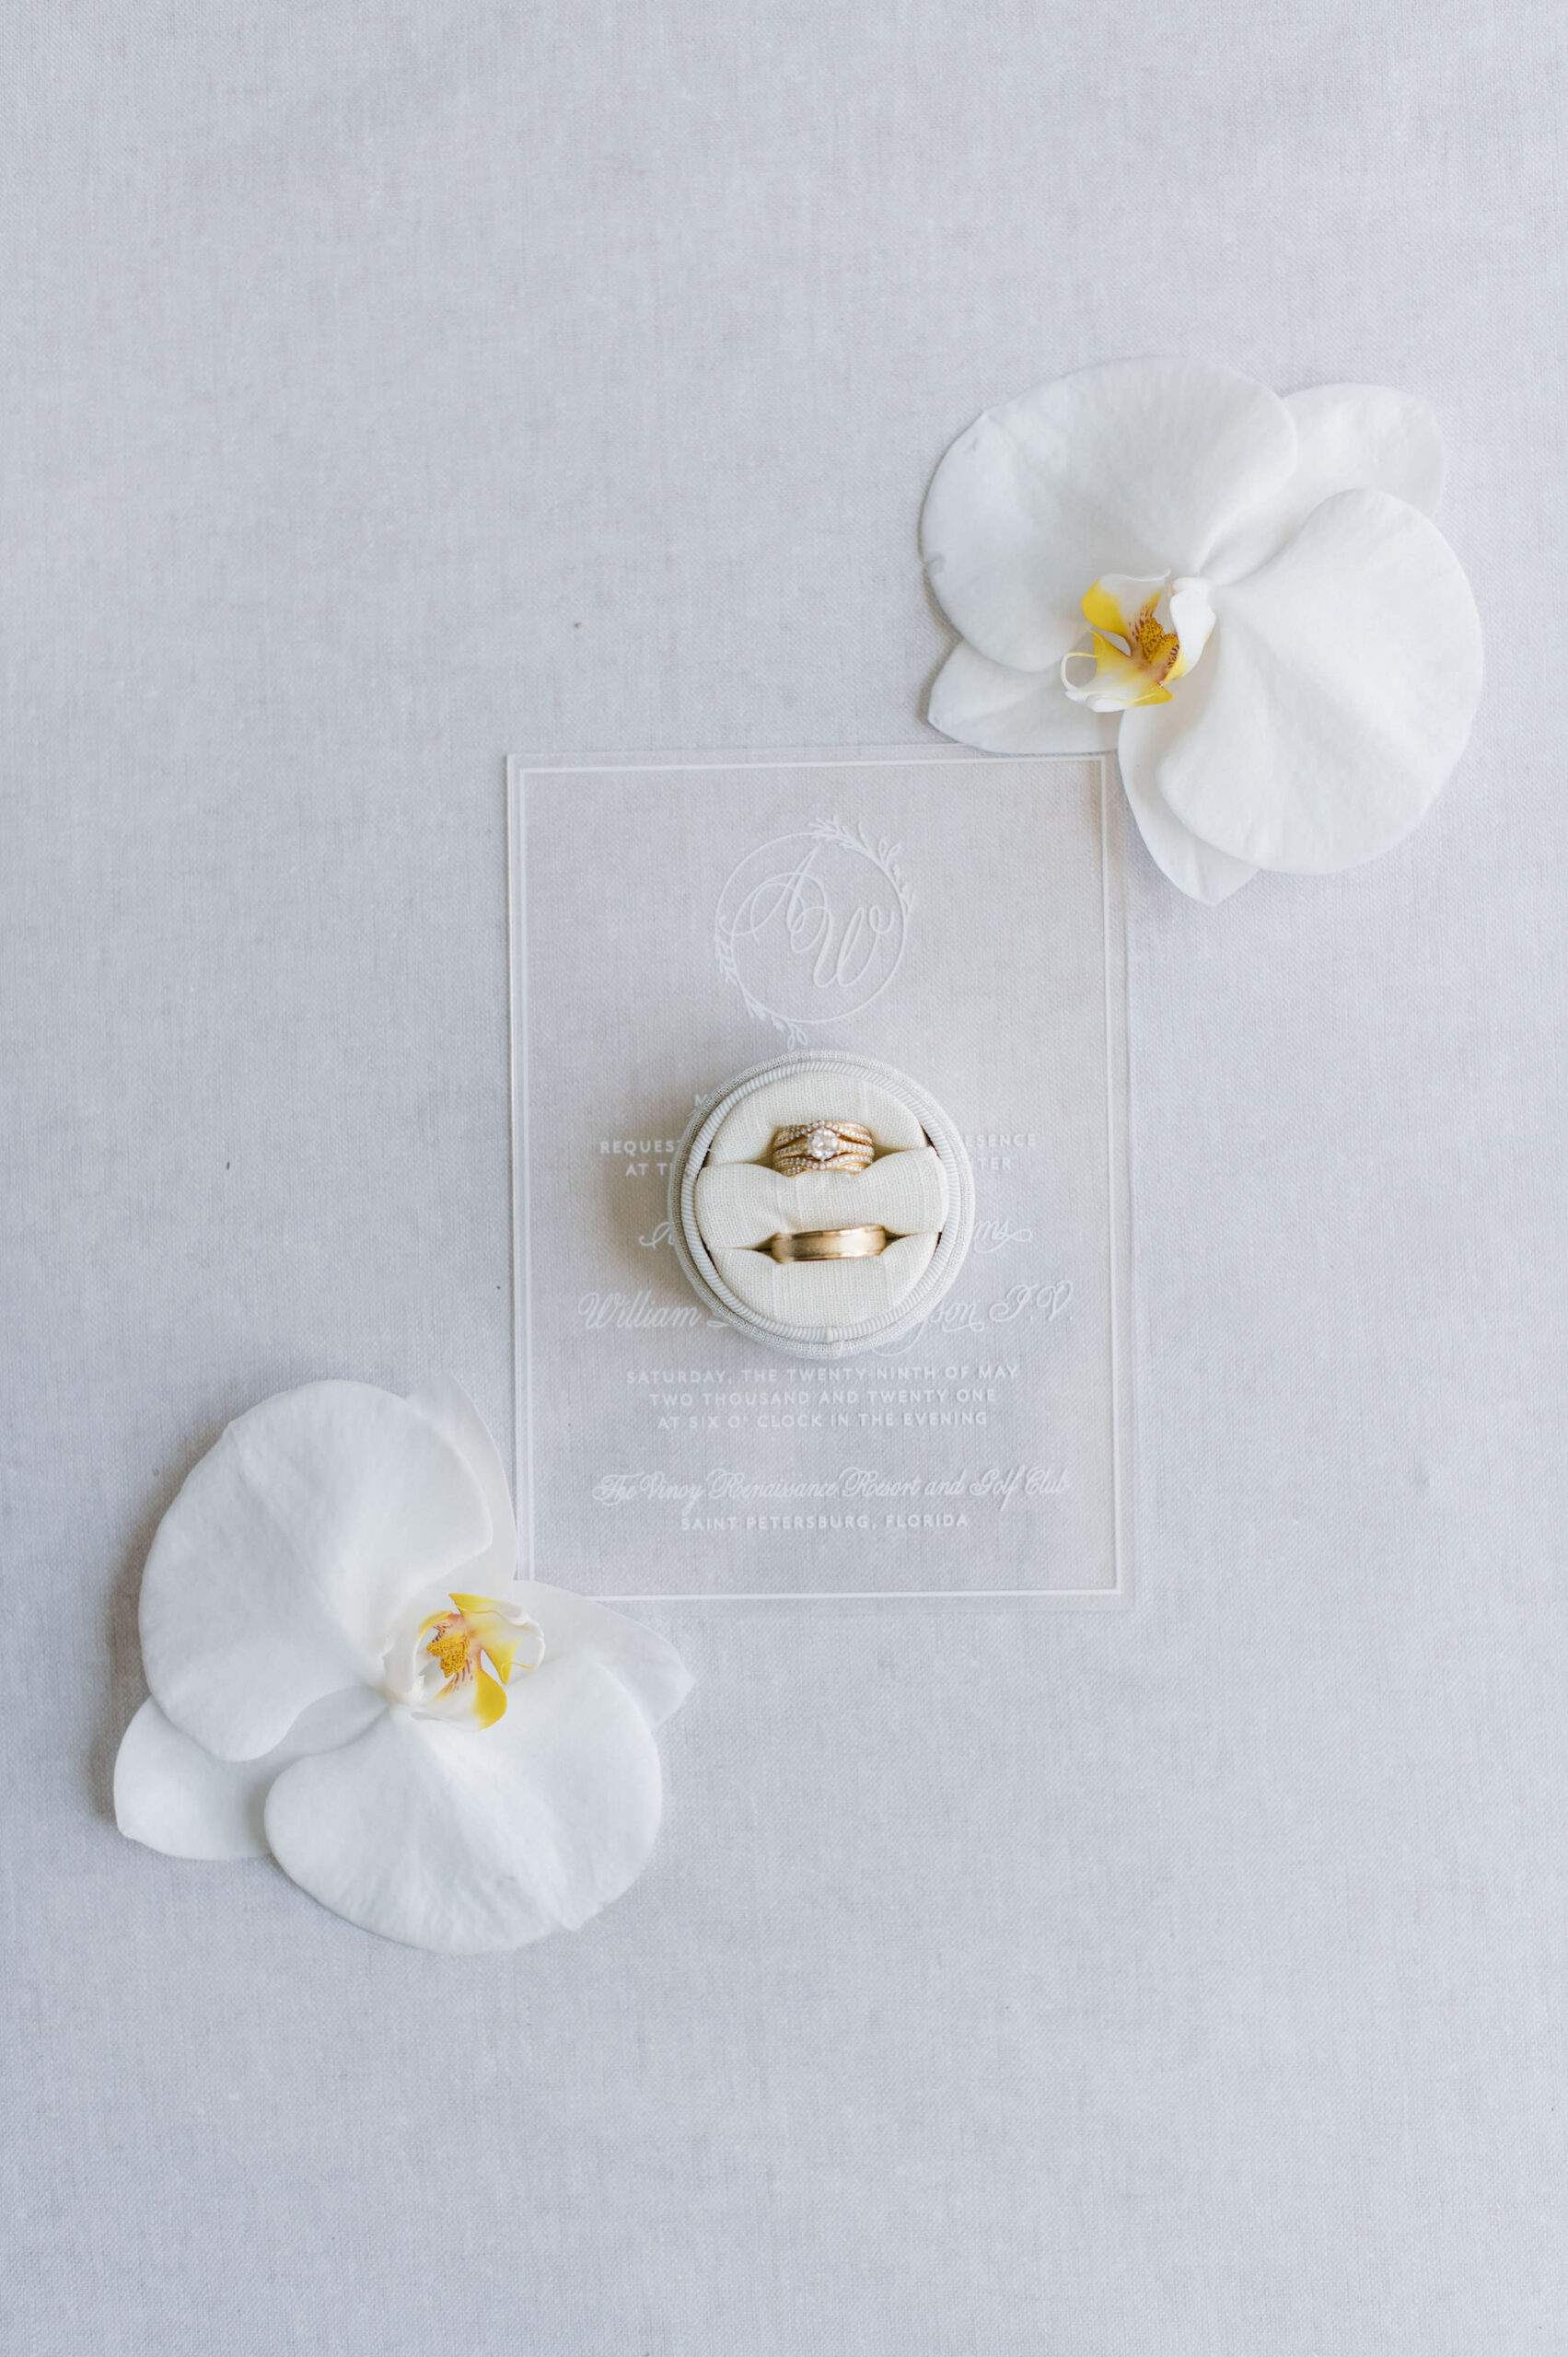 Timeless Classic Wedding, White Orchid Petals, Acrylic Wedding Invitation, Yellow Gold Engagement Ring and Wedding Ring in Round Ring Box